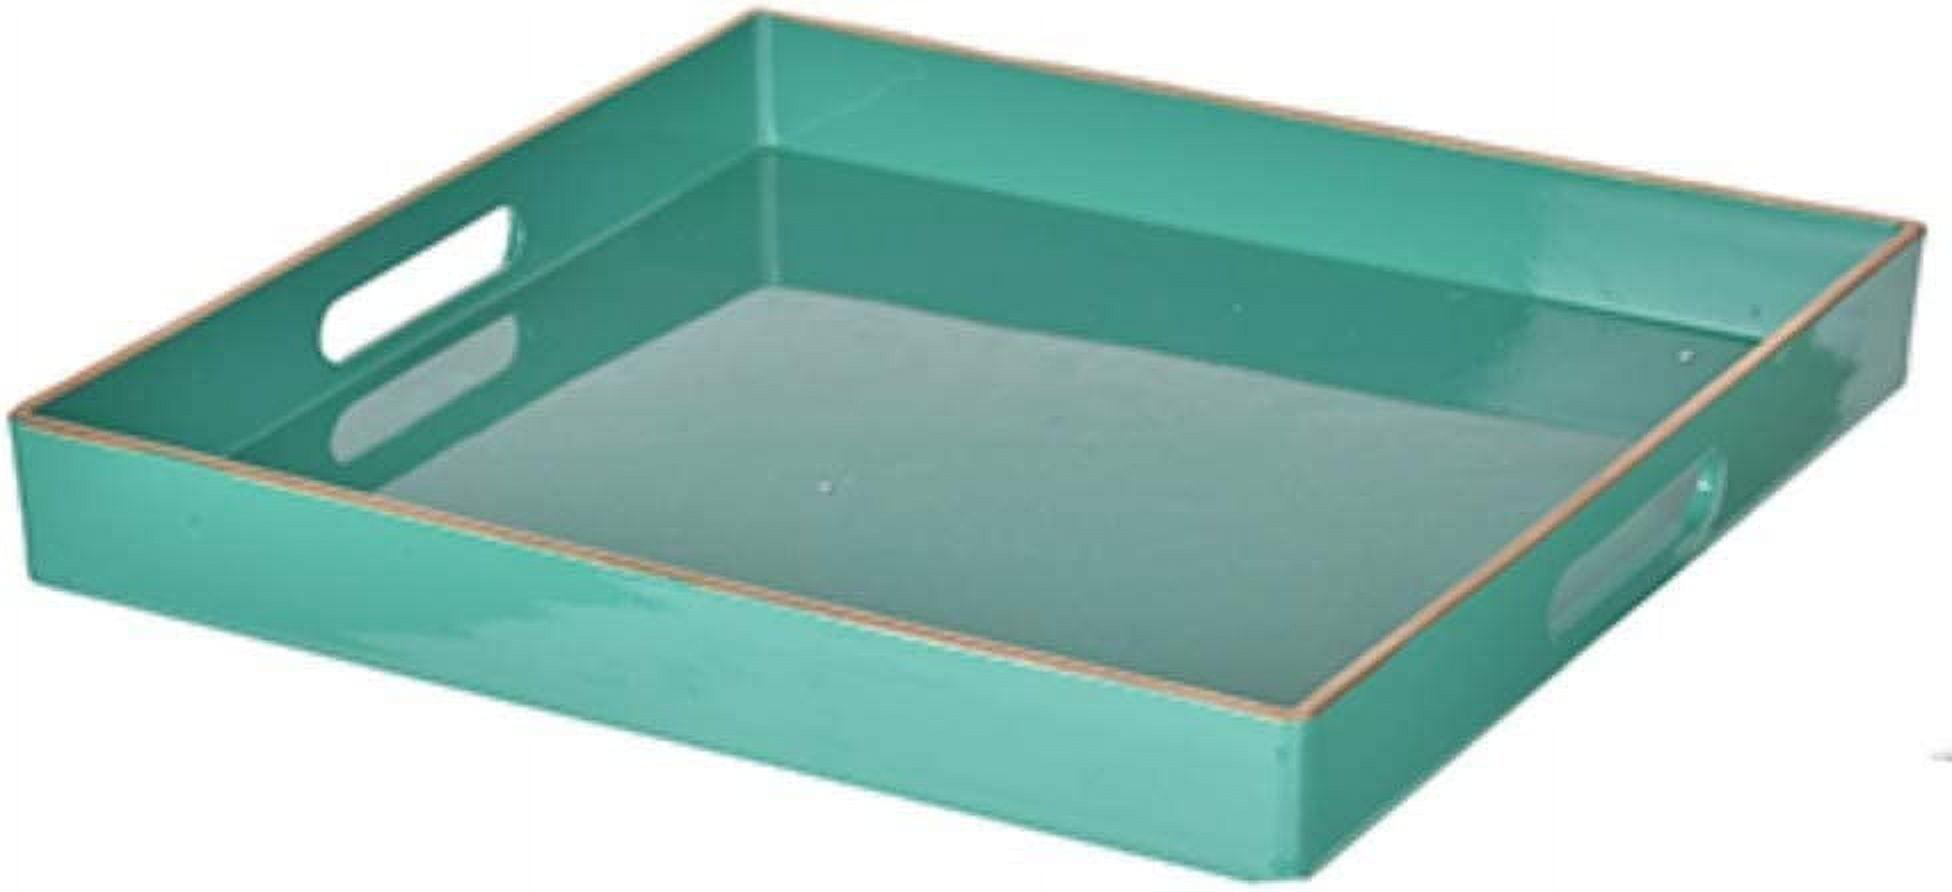 Mimosa Turquoise Square Tray with Elegant Cutout Handles